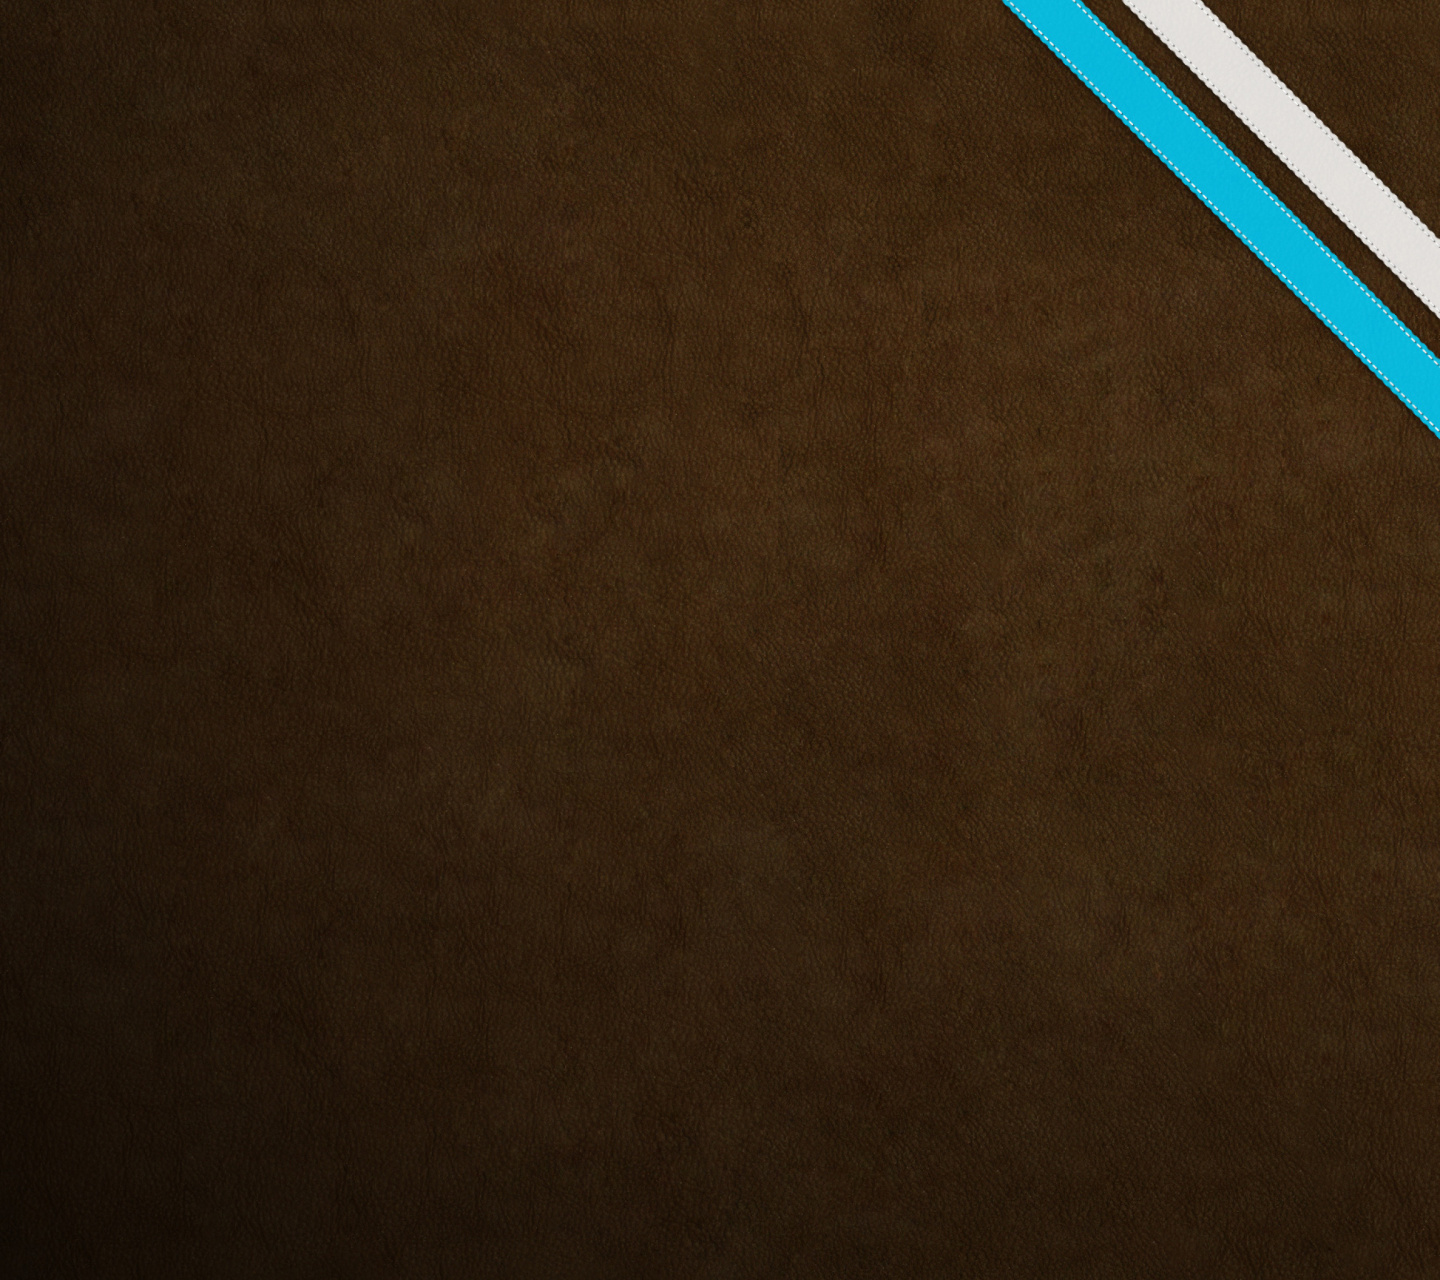 Brown Leather Background screenshot #1 1440x1280